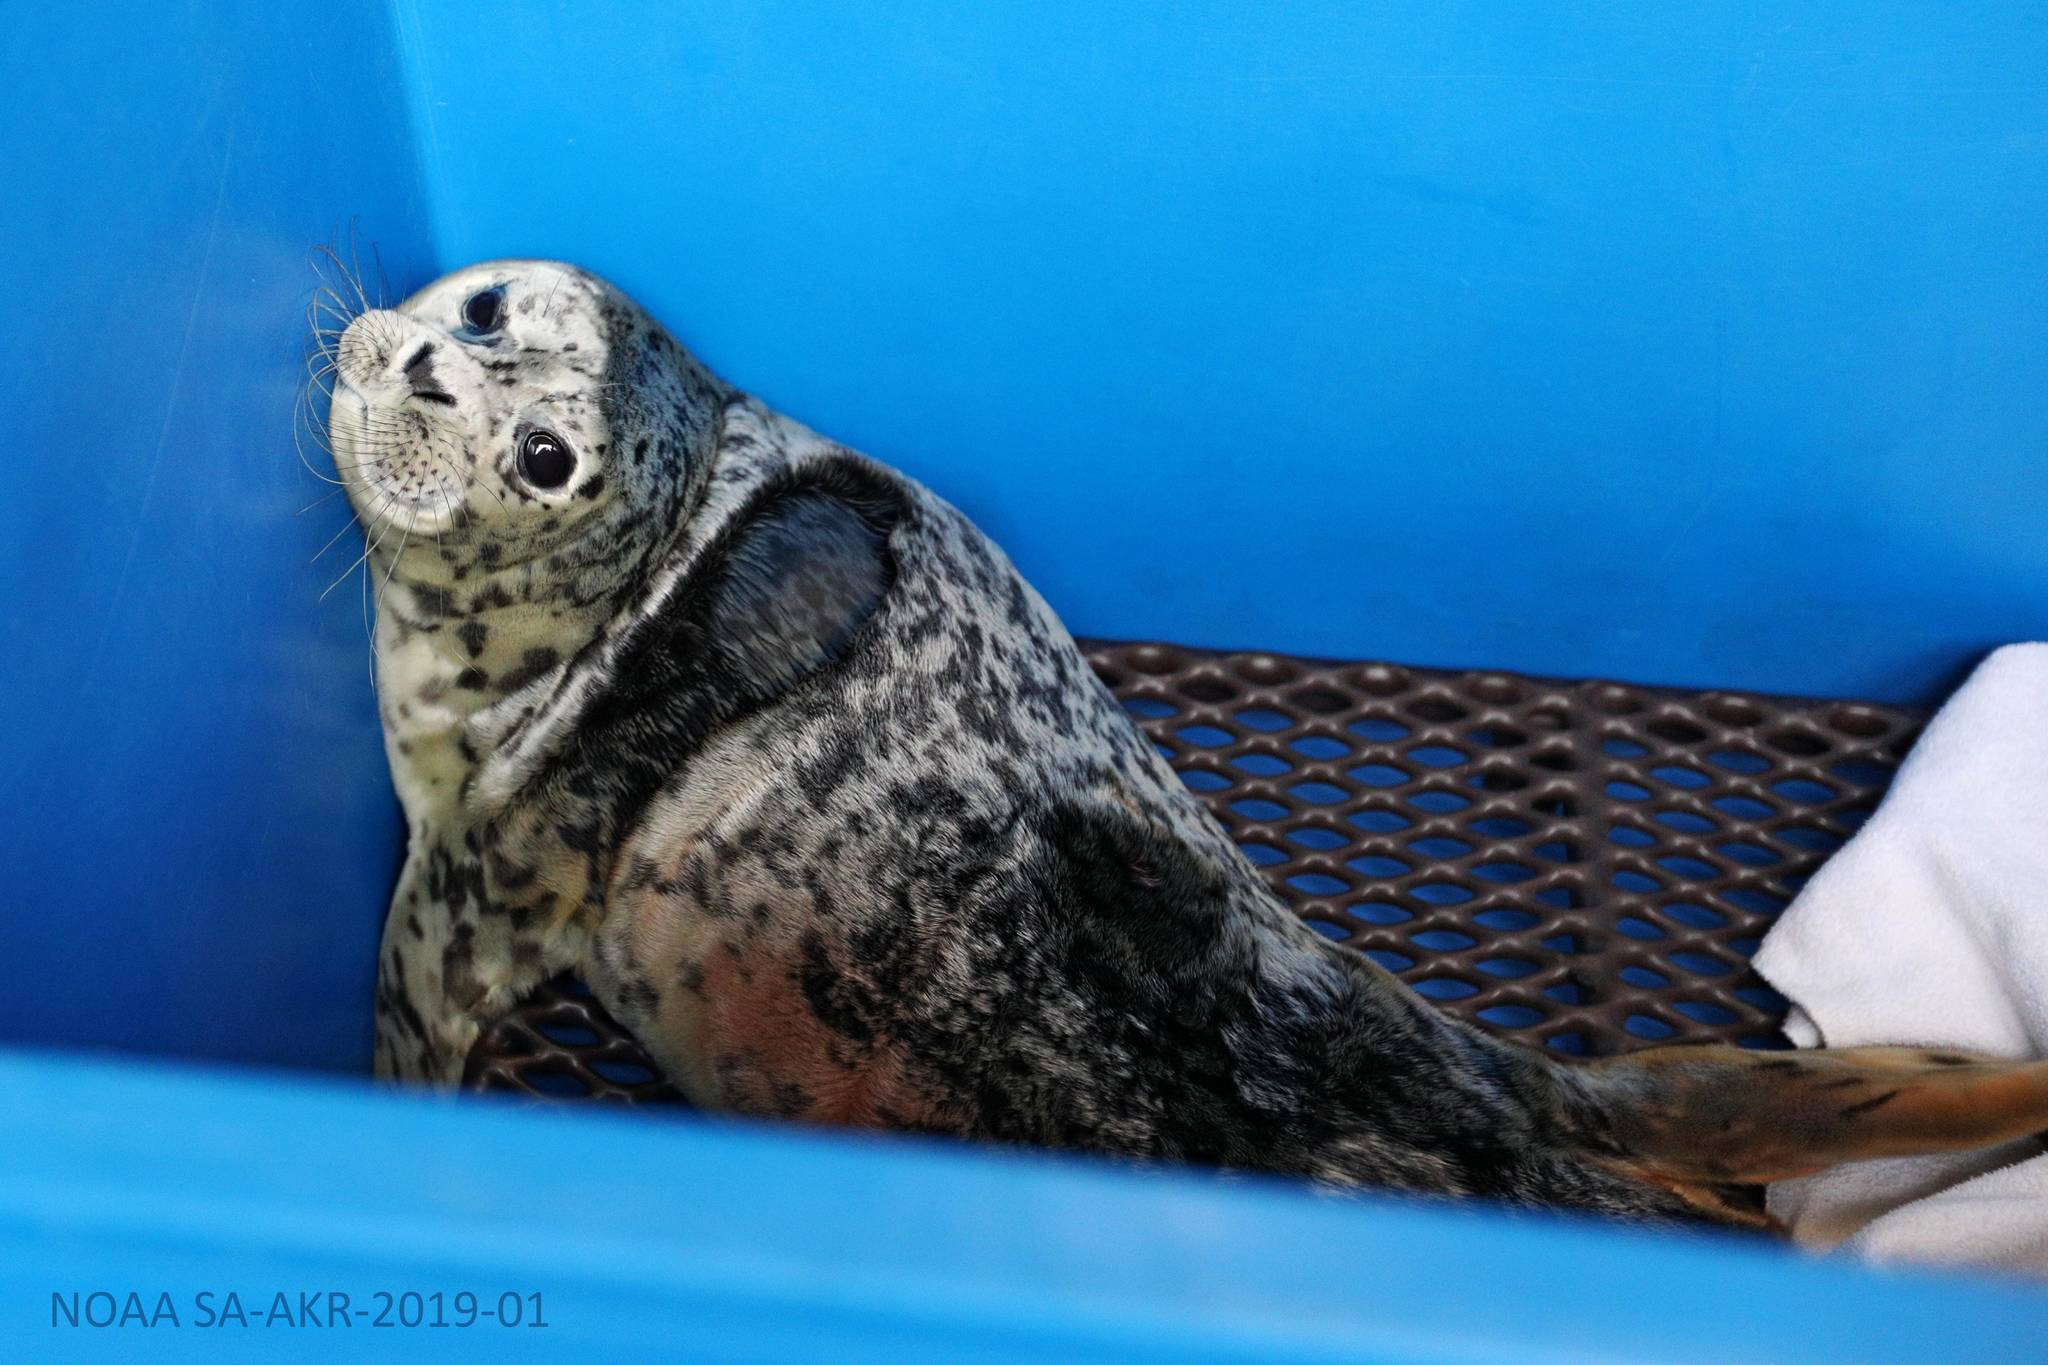 A newborn harbor seal is found and transported to the Alaska SeaLife Center in Seward, Alaska, on Thursday, May 27, 2021. (Photo by the Alaska SeaLife Center)